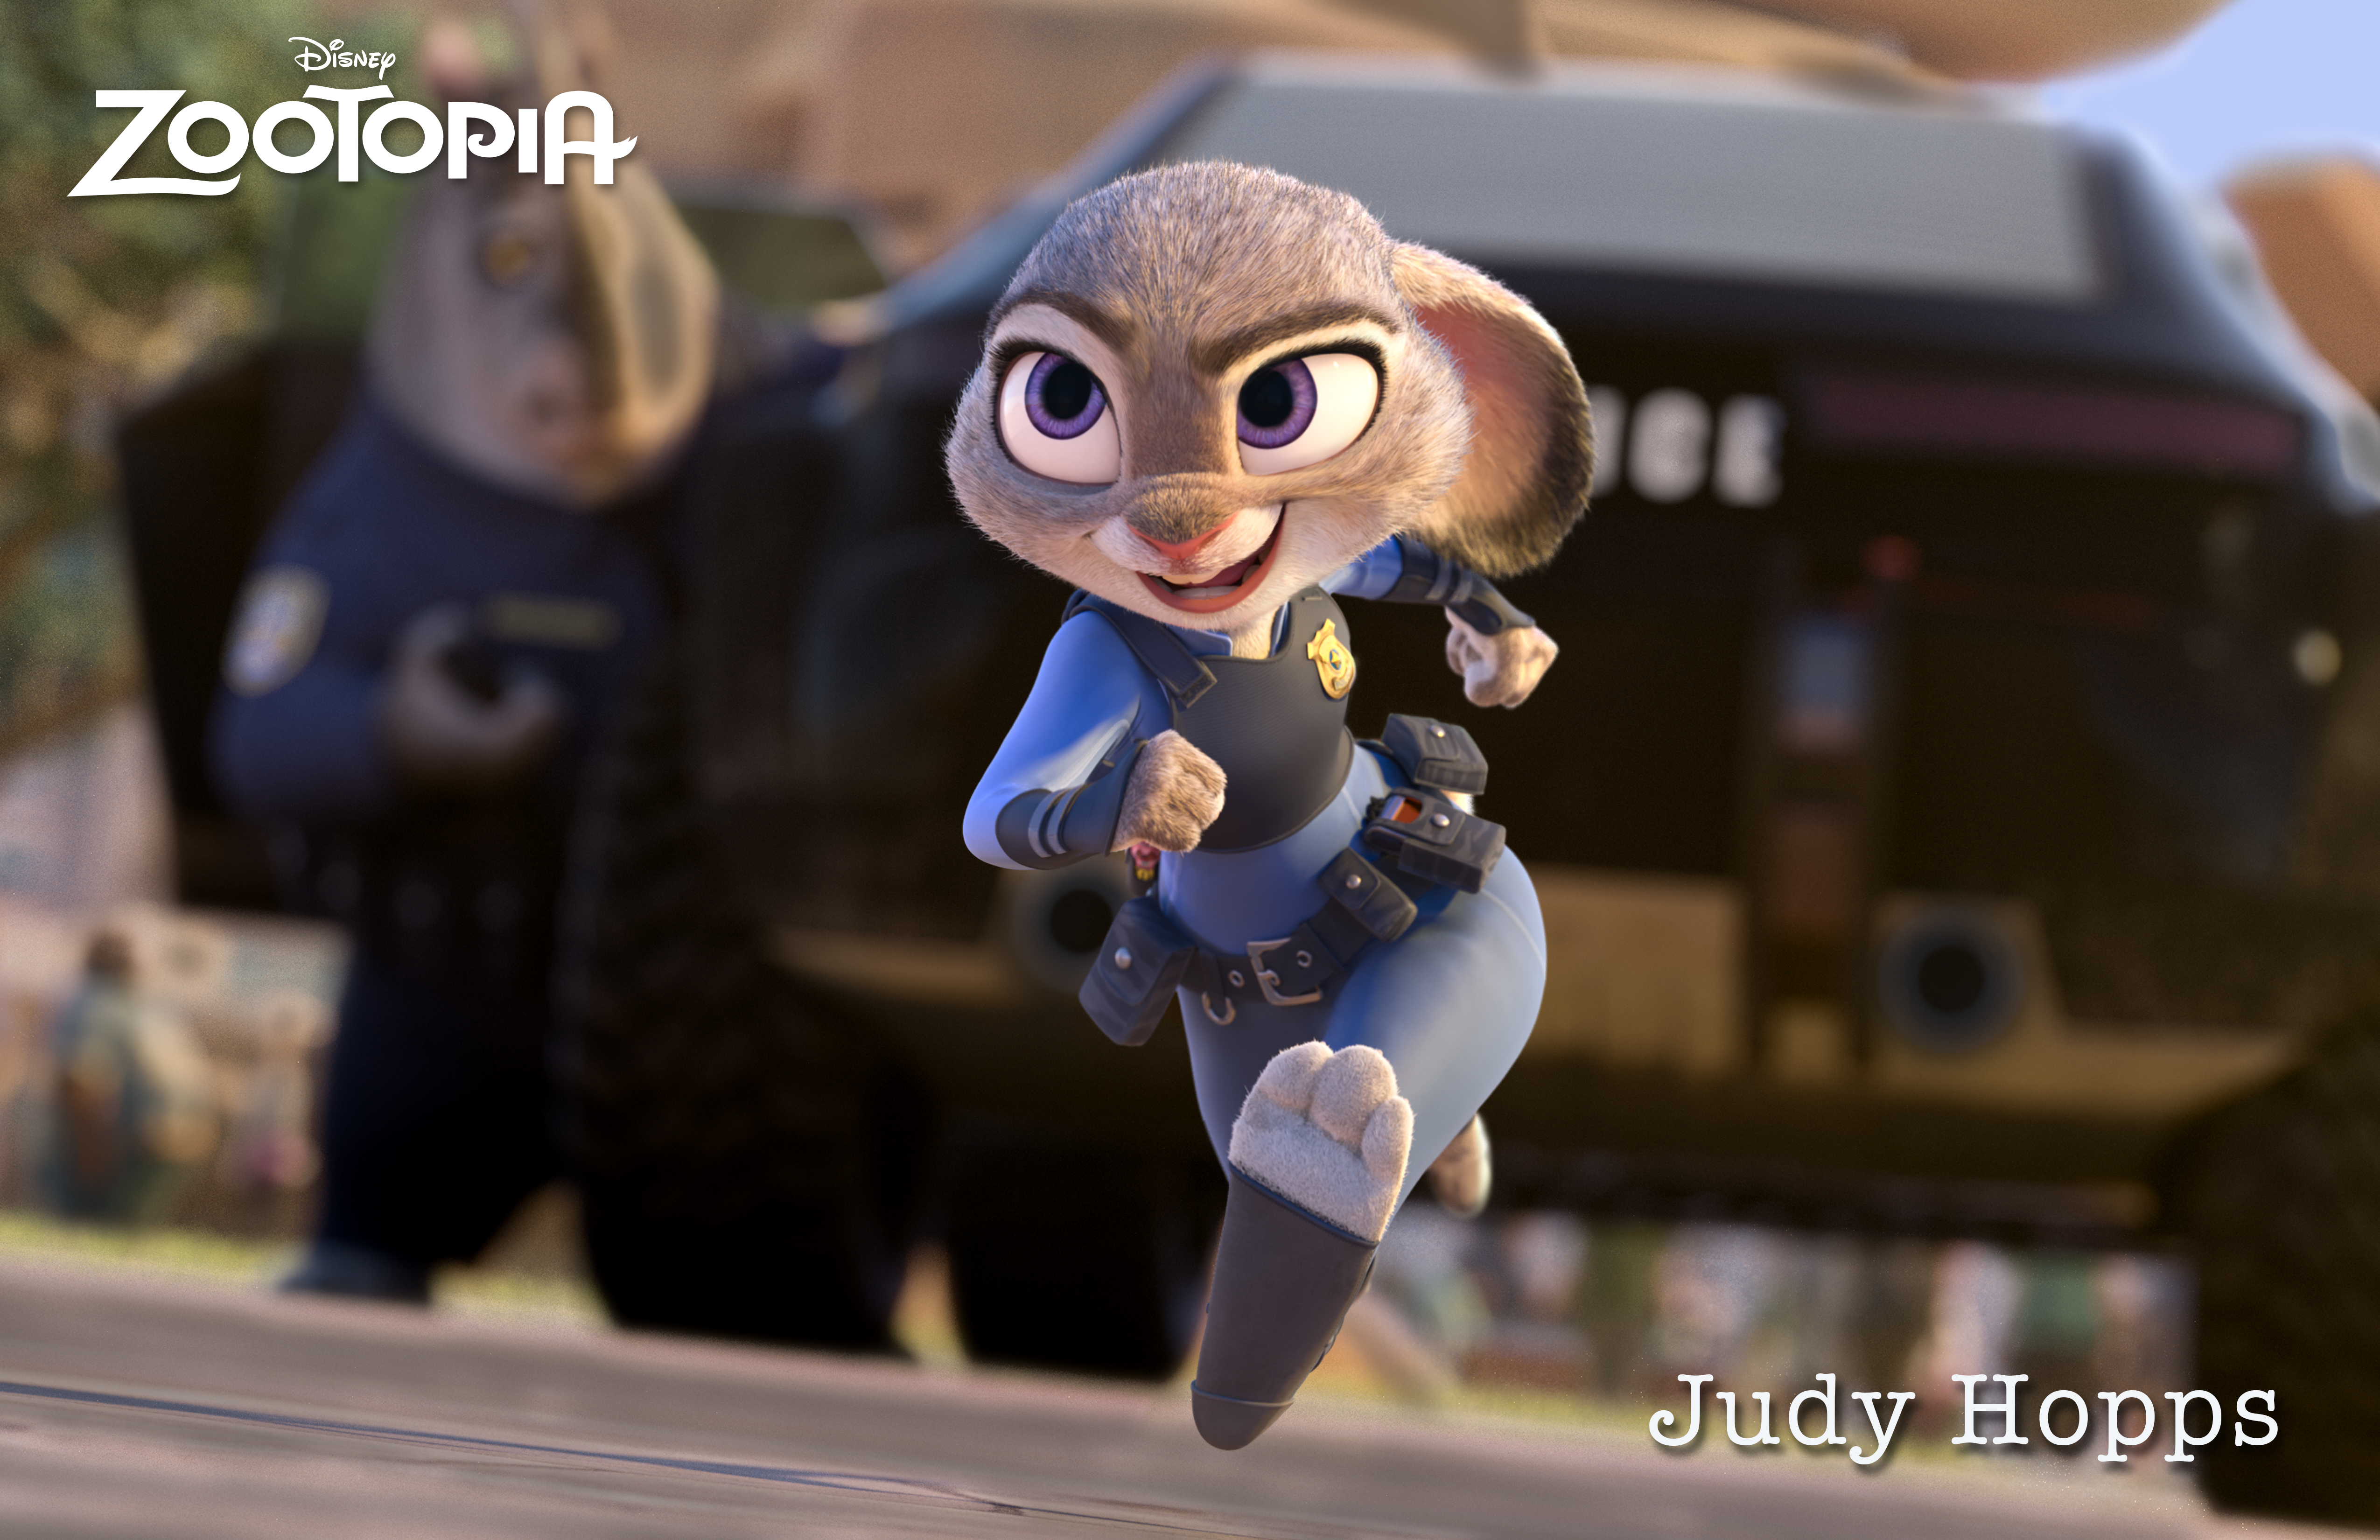 ZOOTOPIA – JUDY HOPPS. ©2015 Disney. All Rights Reserved.